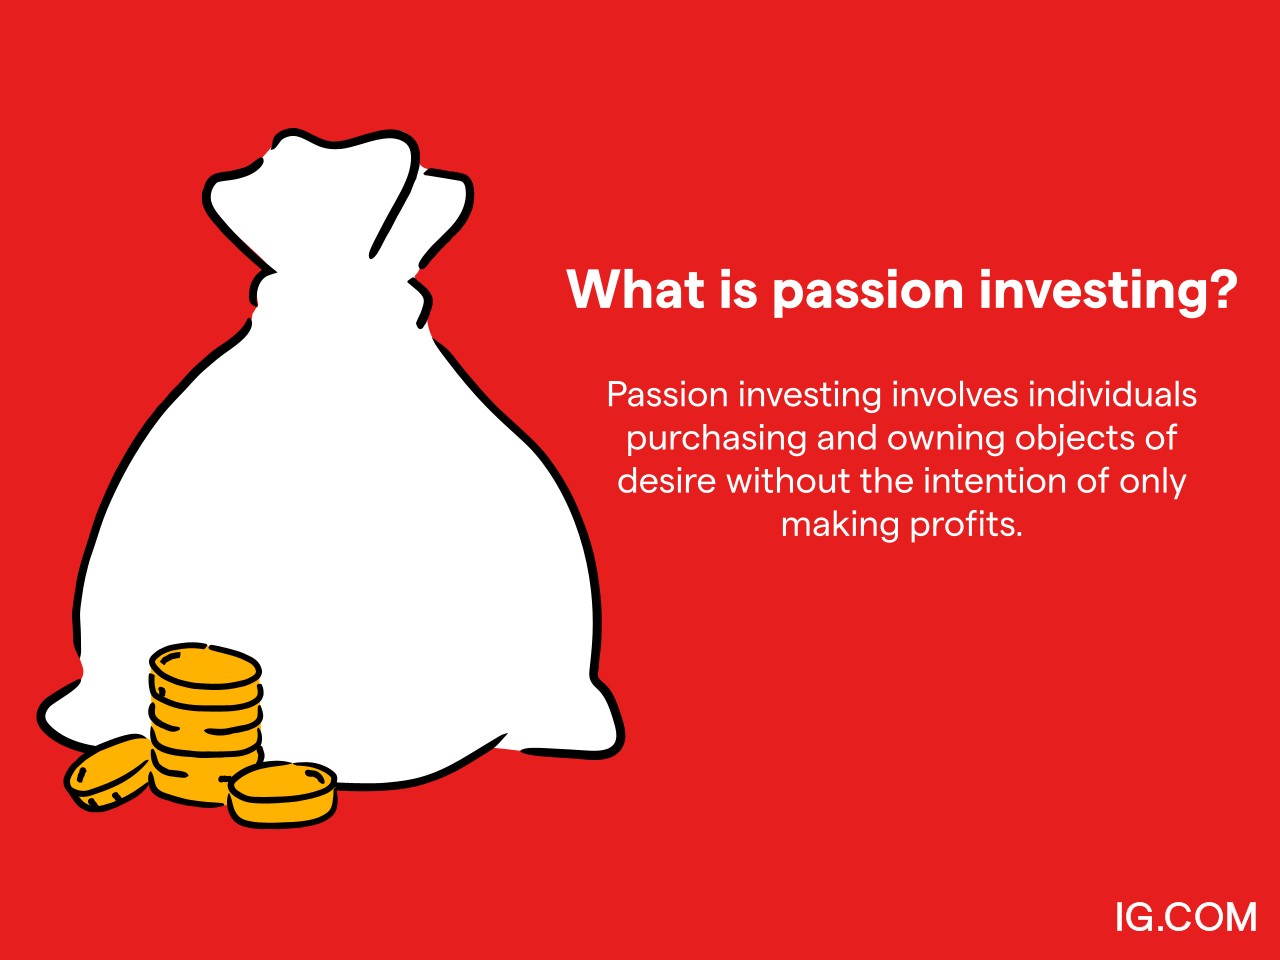 What is passion investing?